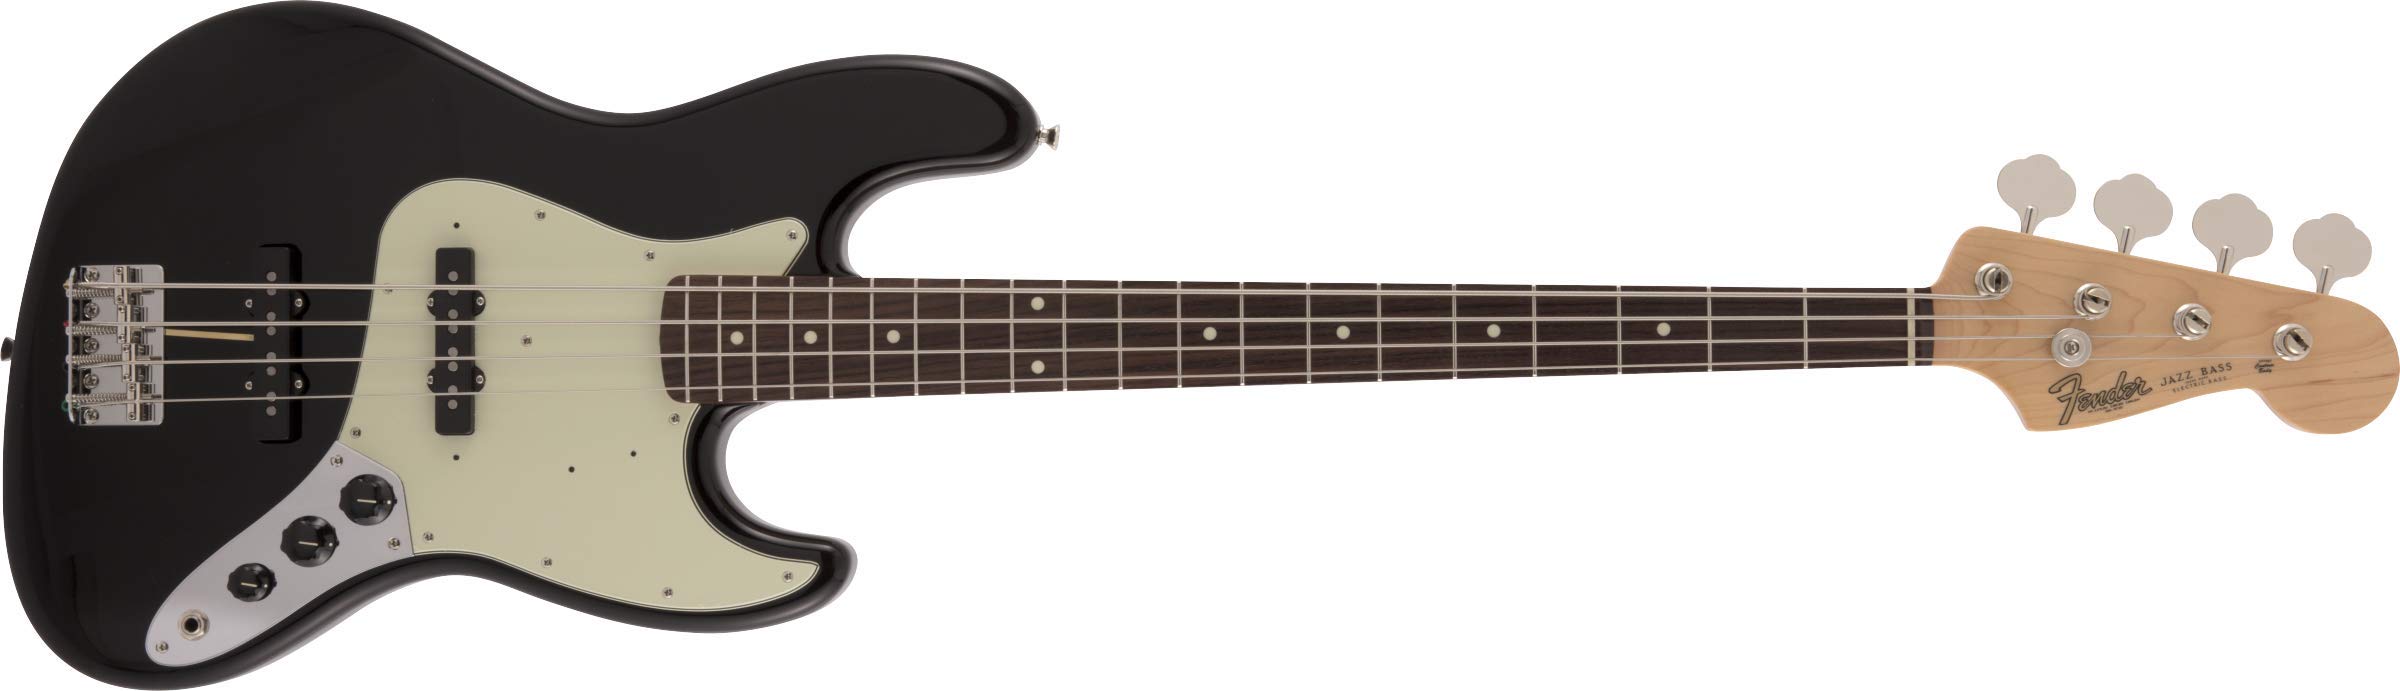 Fender Made in Japan Traditional 60s Electric Jazz Bass Black ‎5362100306 NEW_1